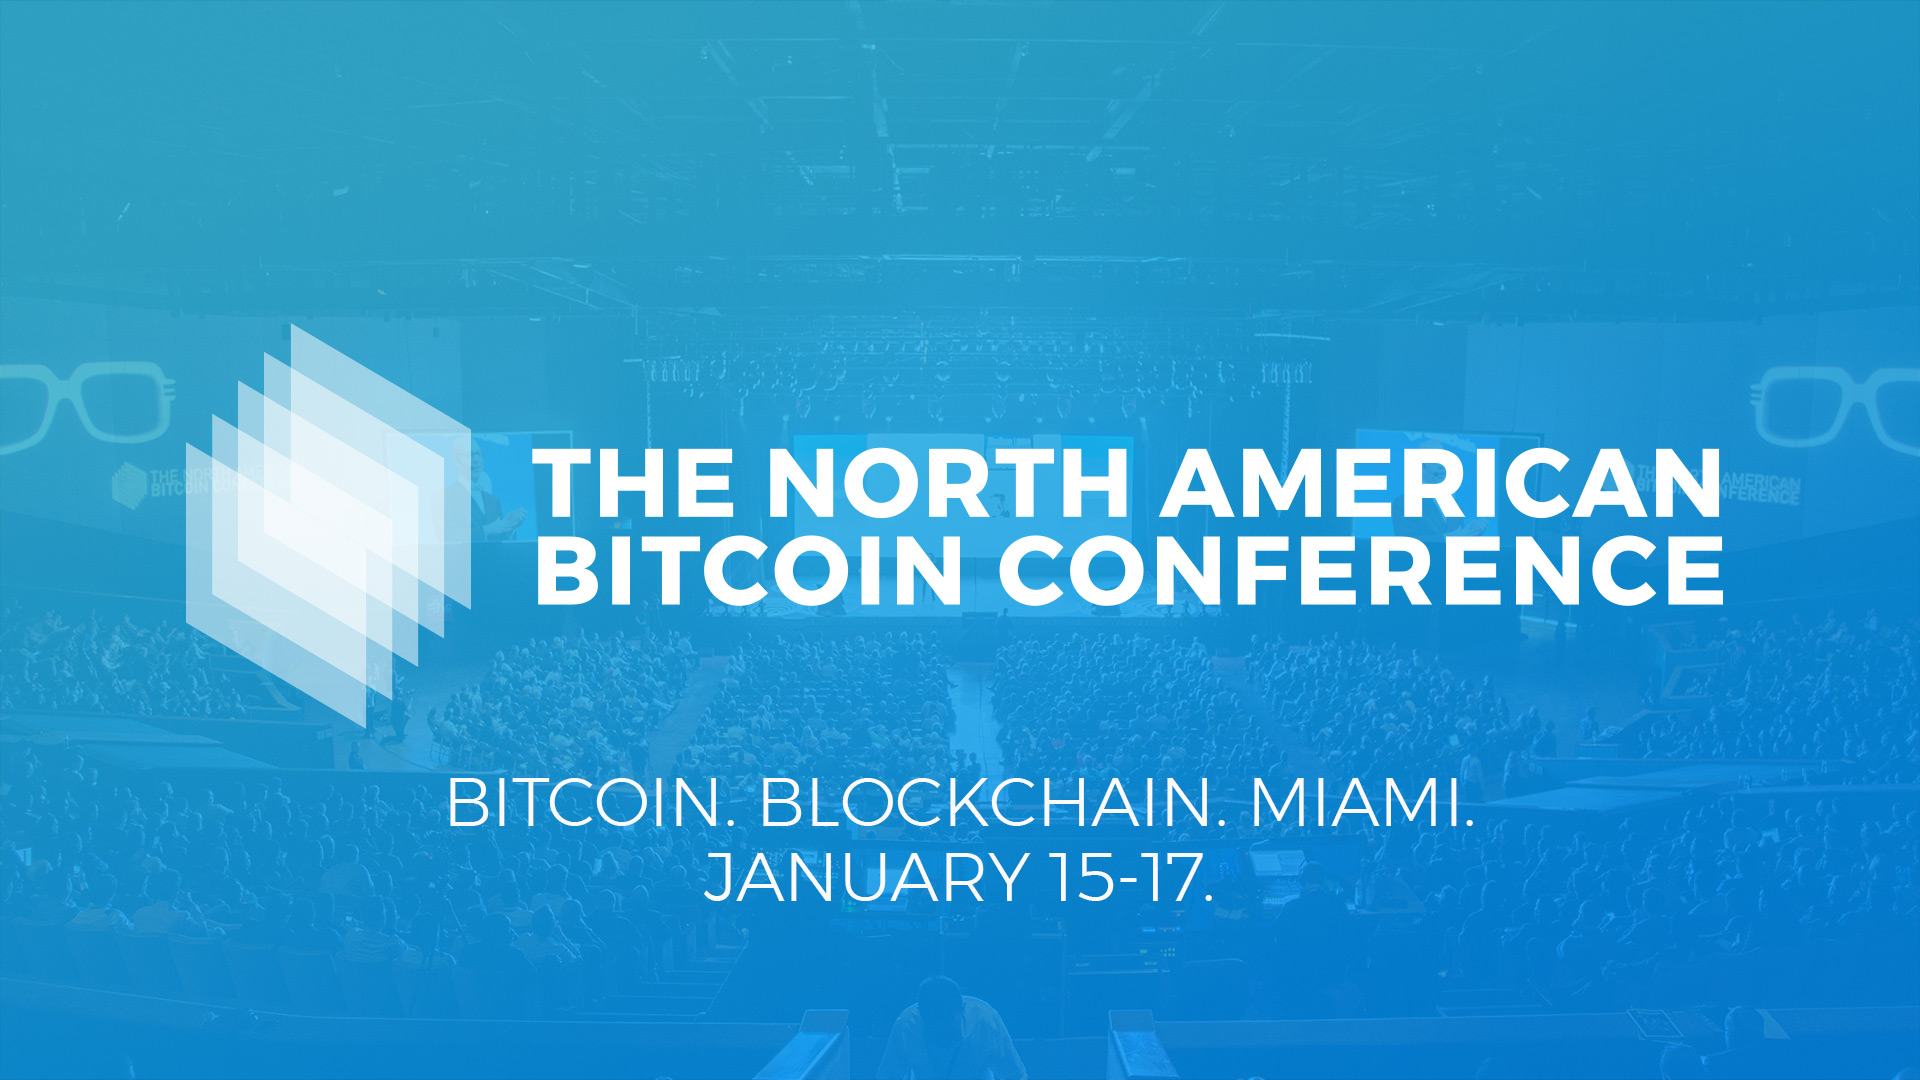 The North American Bitcoin Conference 2020 organized by 